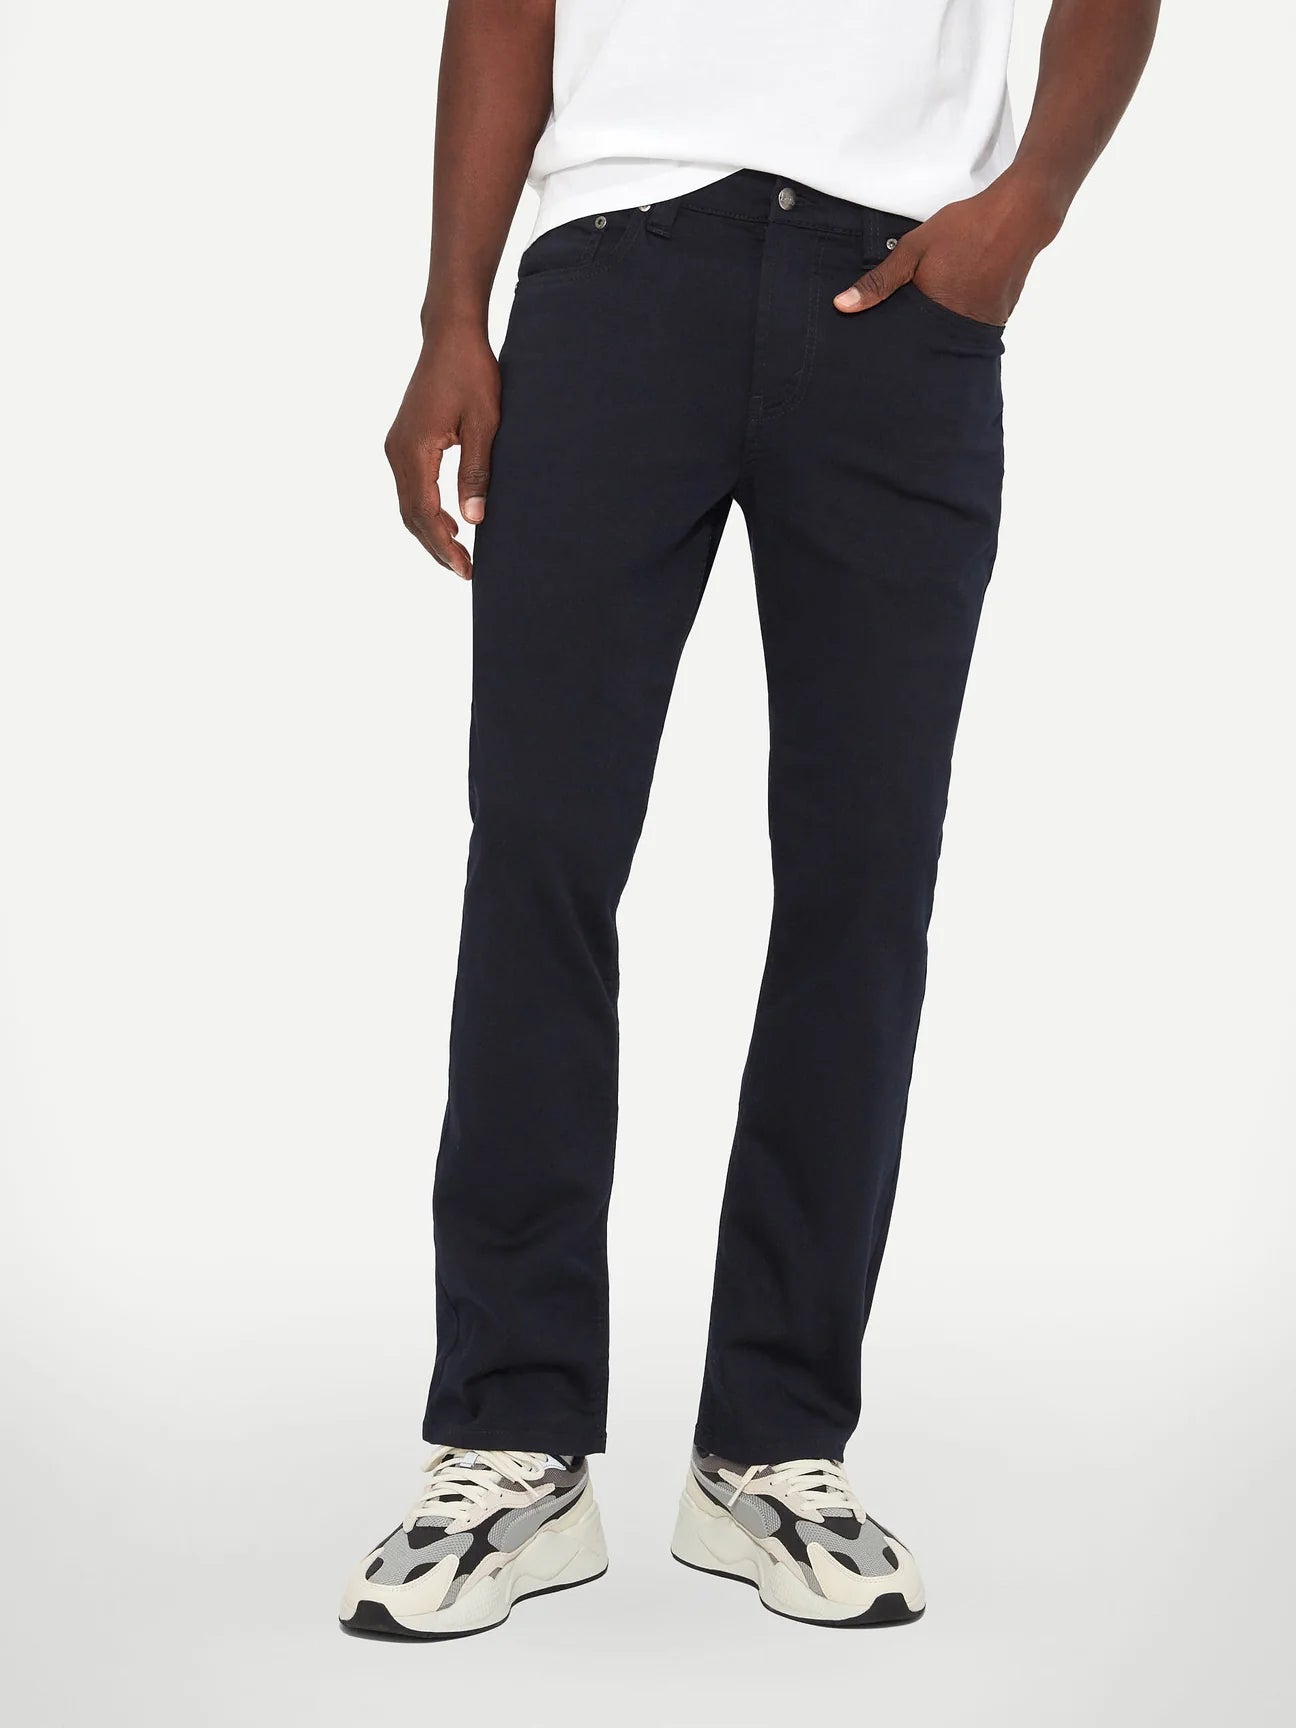 Looking for that oh so colourful but classy pair of jeans? Look no more! With its stretch twill, this pant guarantees ease of movement and style for your everyday activities.  Chose the BRAD SLIM if you are looking for a regular fit, a slim leg, an elastic waistband (extra-comfort!) and 5 practical pockets. You will not regret it!